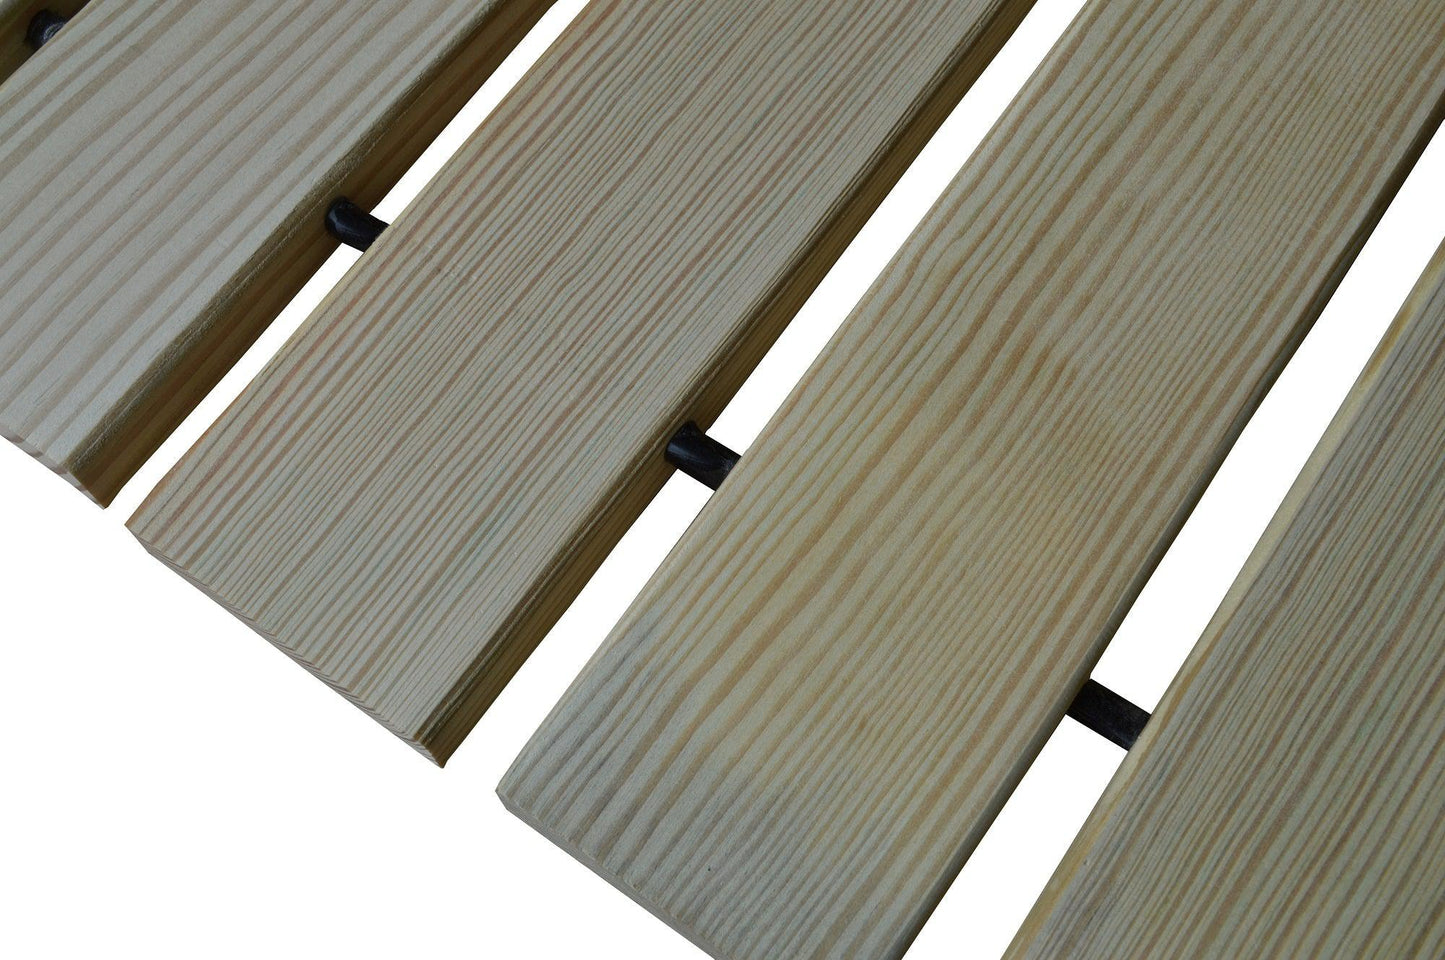 A&L Furniture Co. Pressure Treated Pine 2' x 3' Walkway - LEAD TIME TO SHIP 10 BUSINESS DAYS